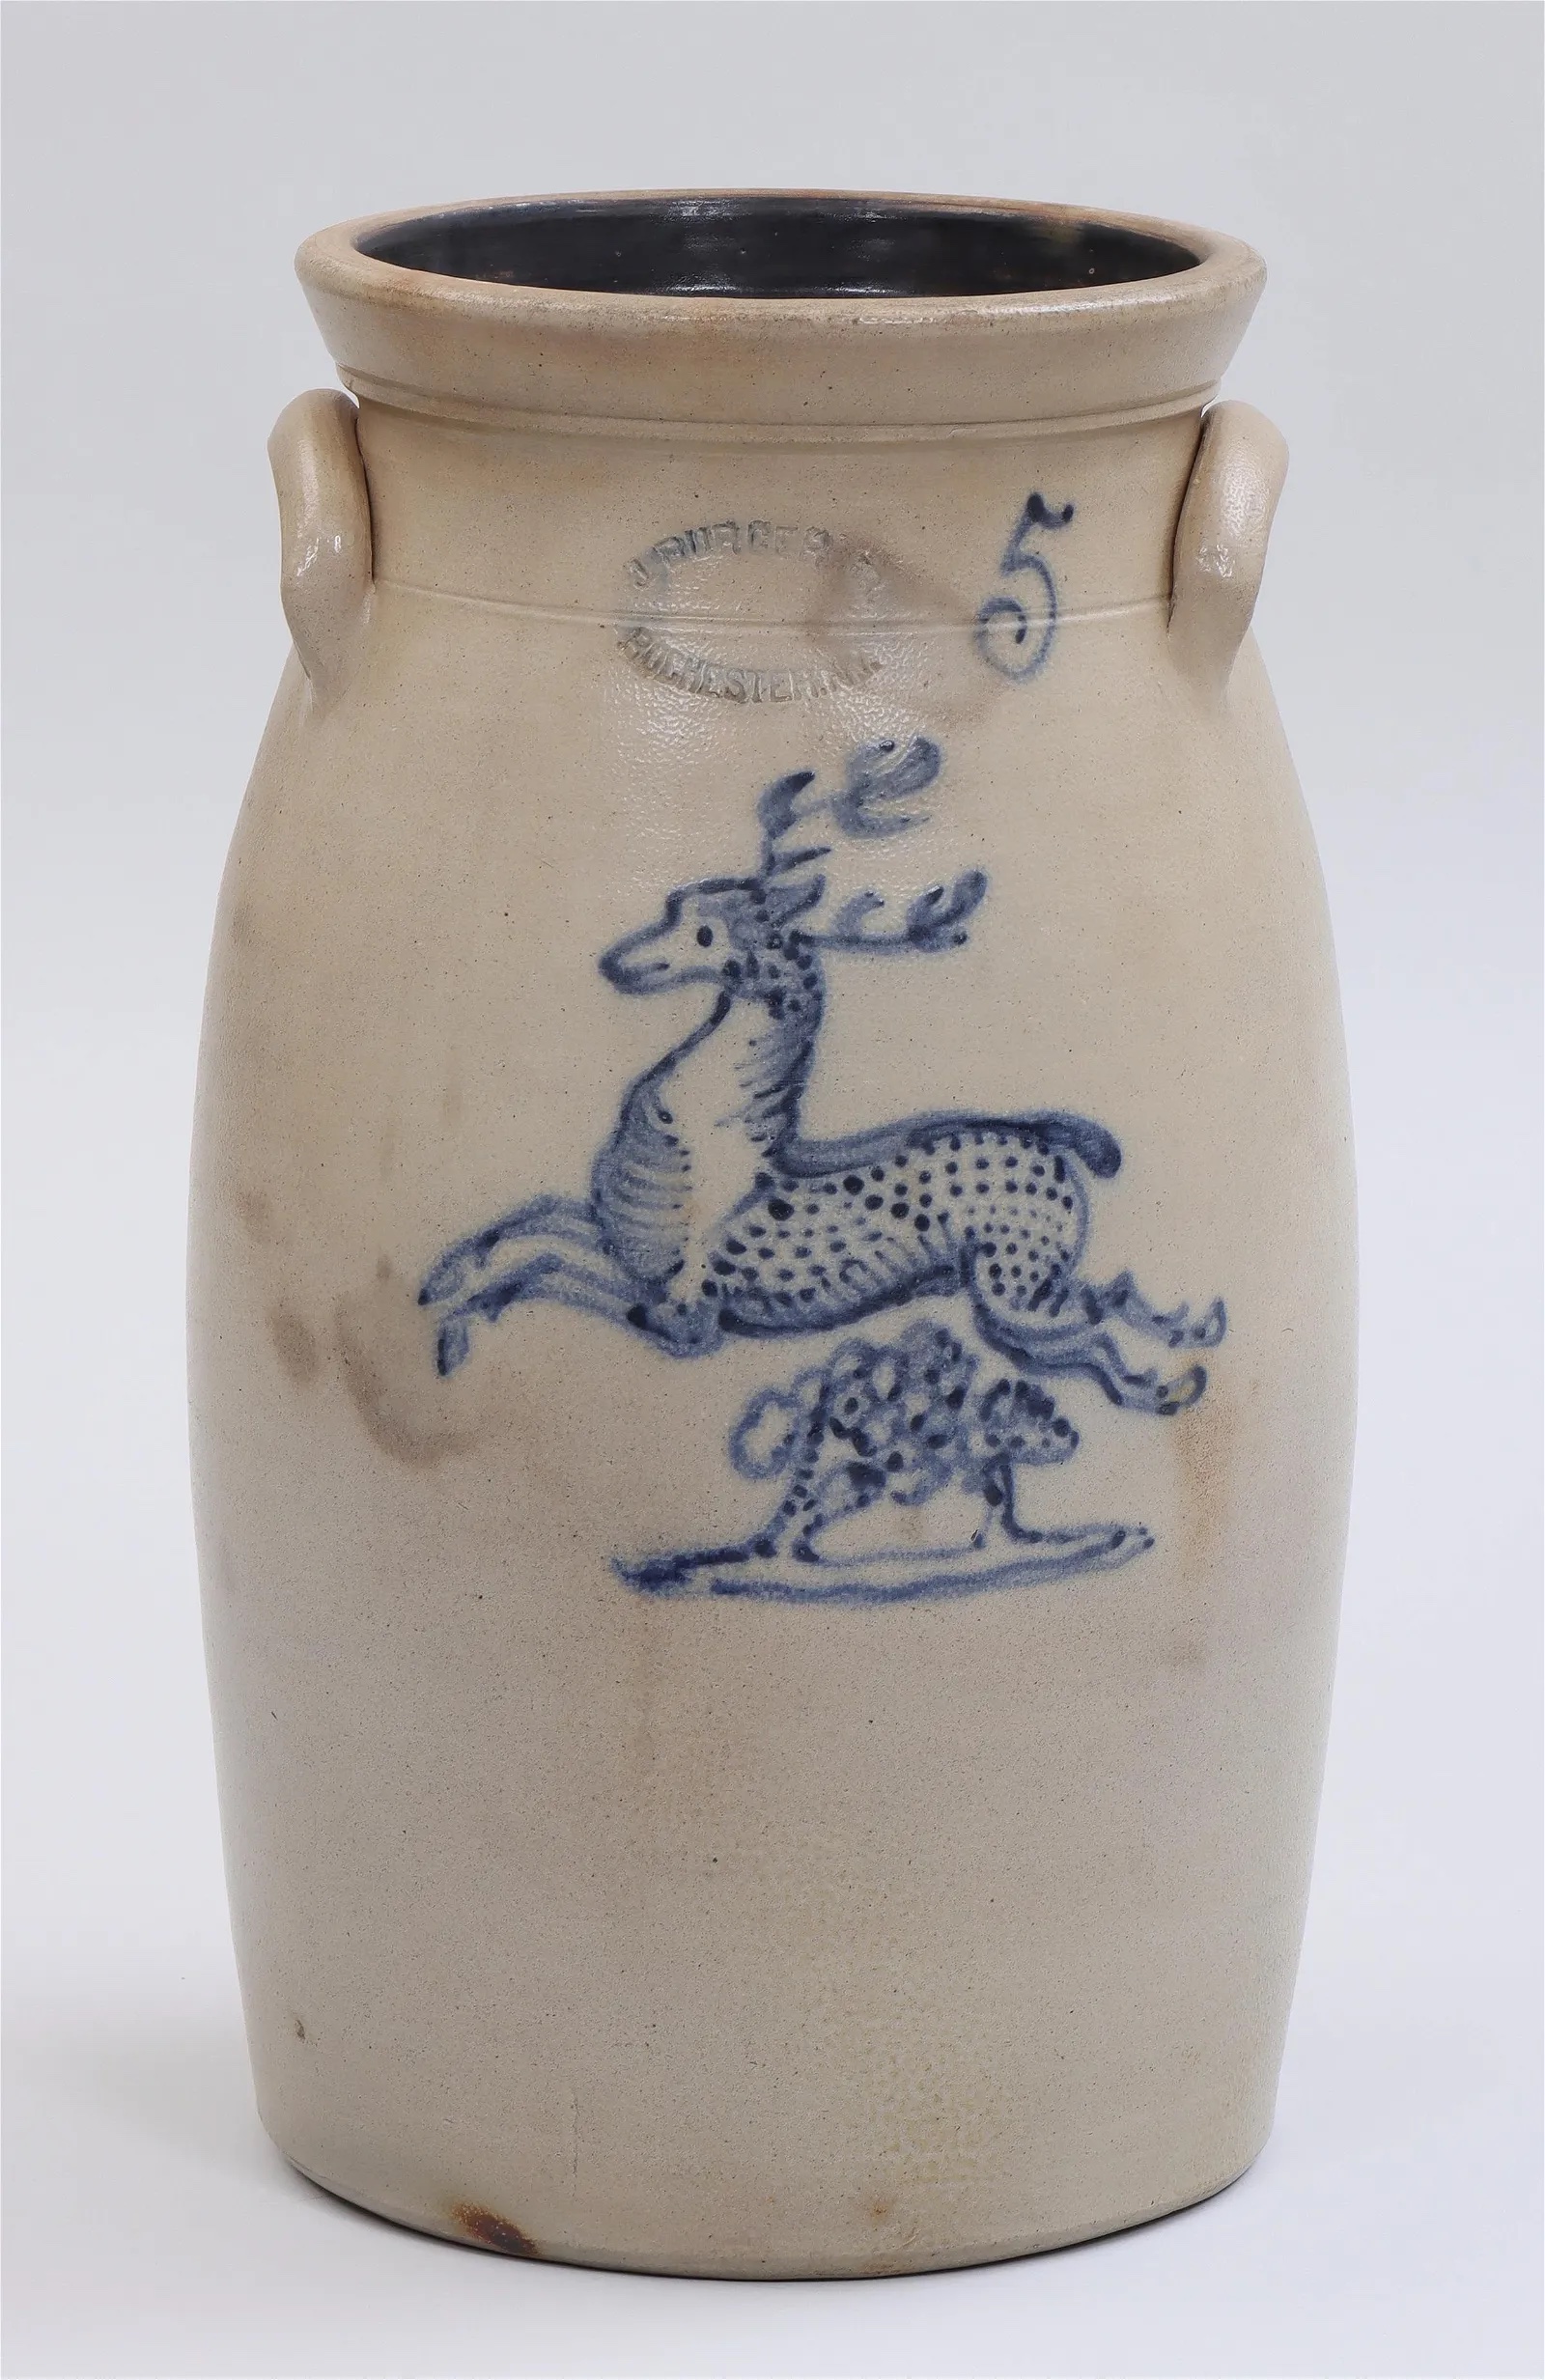 19th-century American stoneware 5-gallon churn, which sold for $5,600 ($7,000 with buyer’s premium) at South Bay